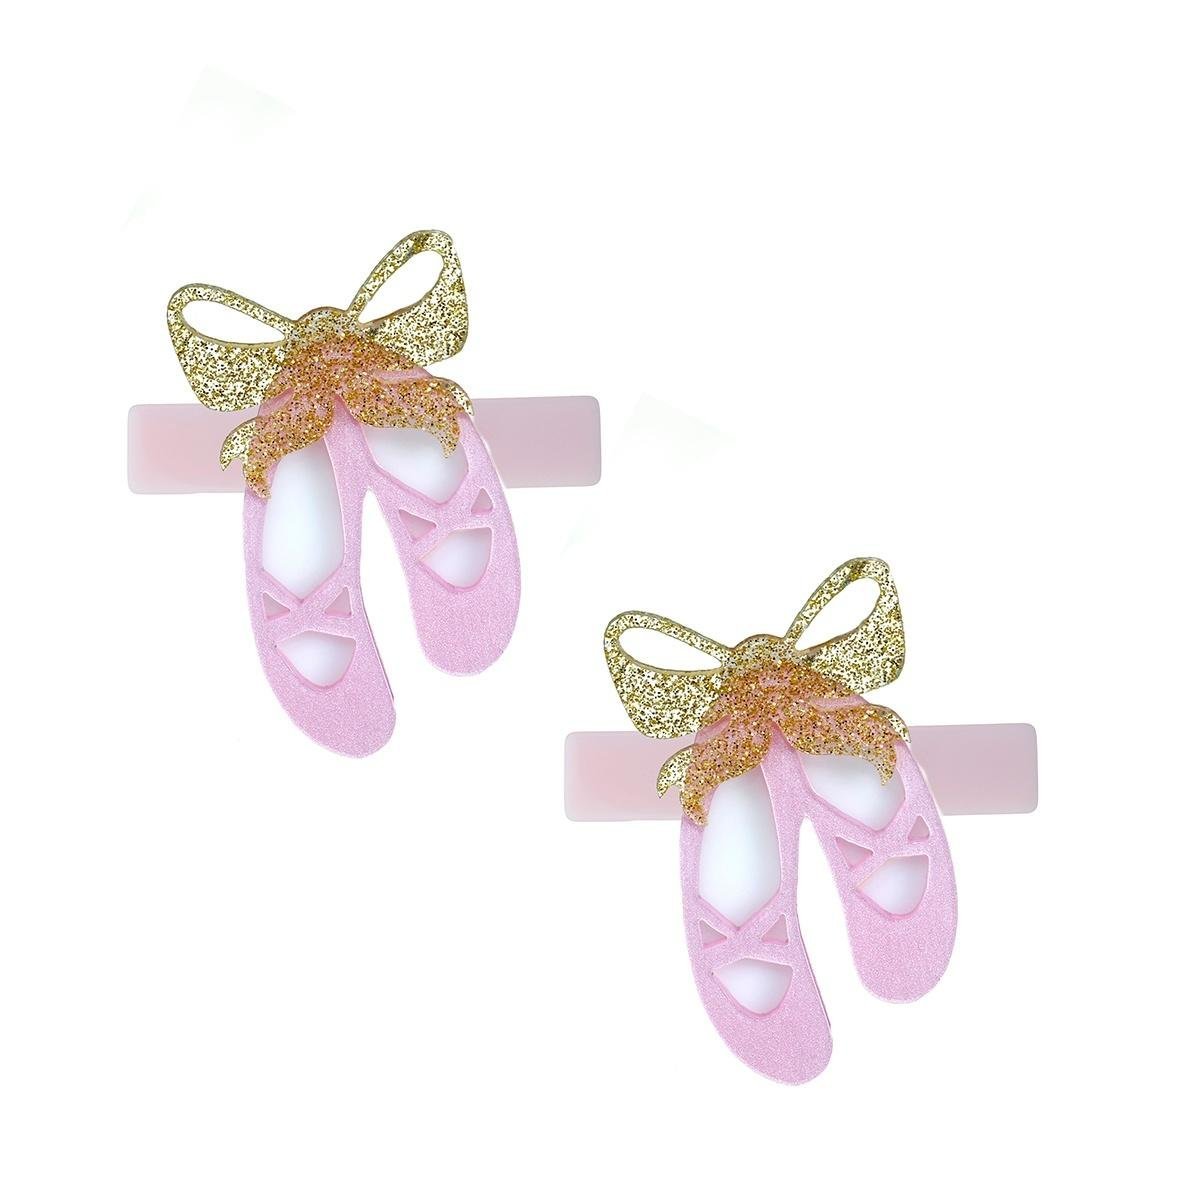 BALLET SLIPPERS ALLIGATOR CLIPS (PREORDER) - LILIES & ROSES